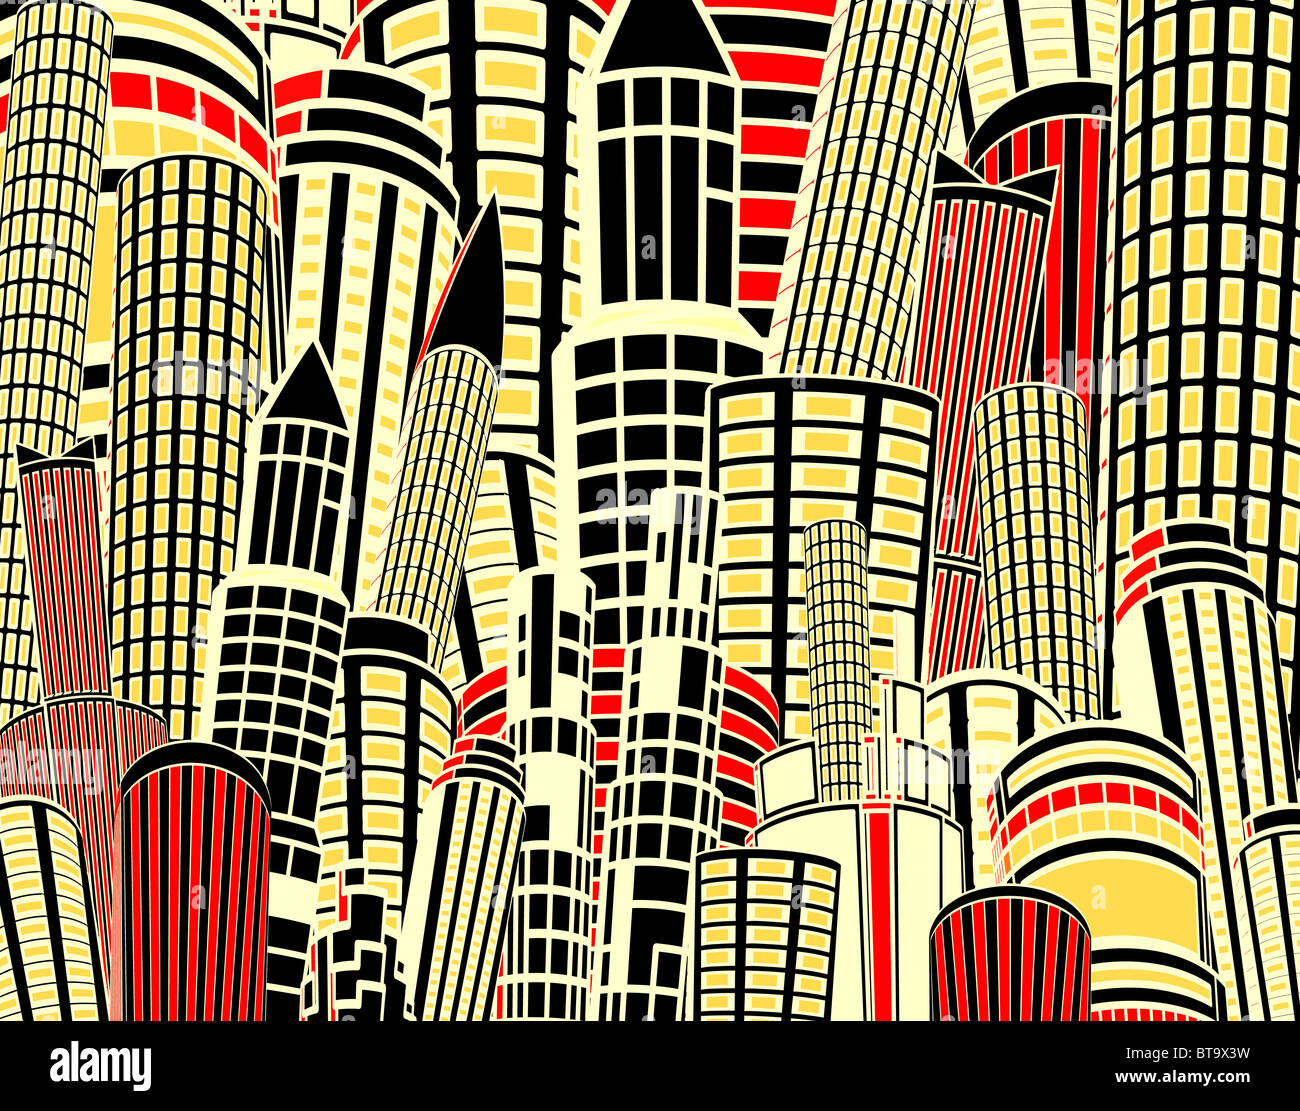 Illustration of tall city buildings Stock Photo